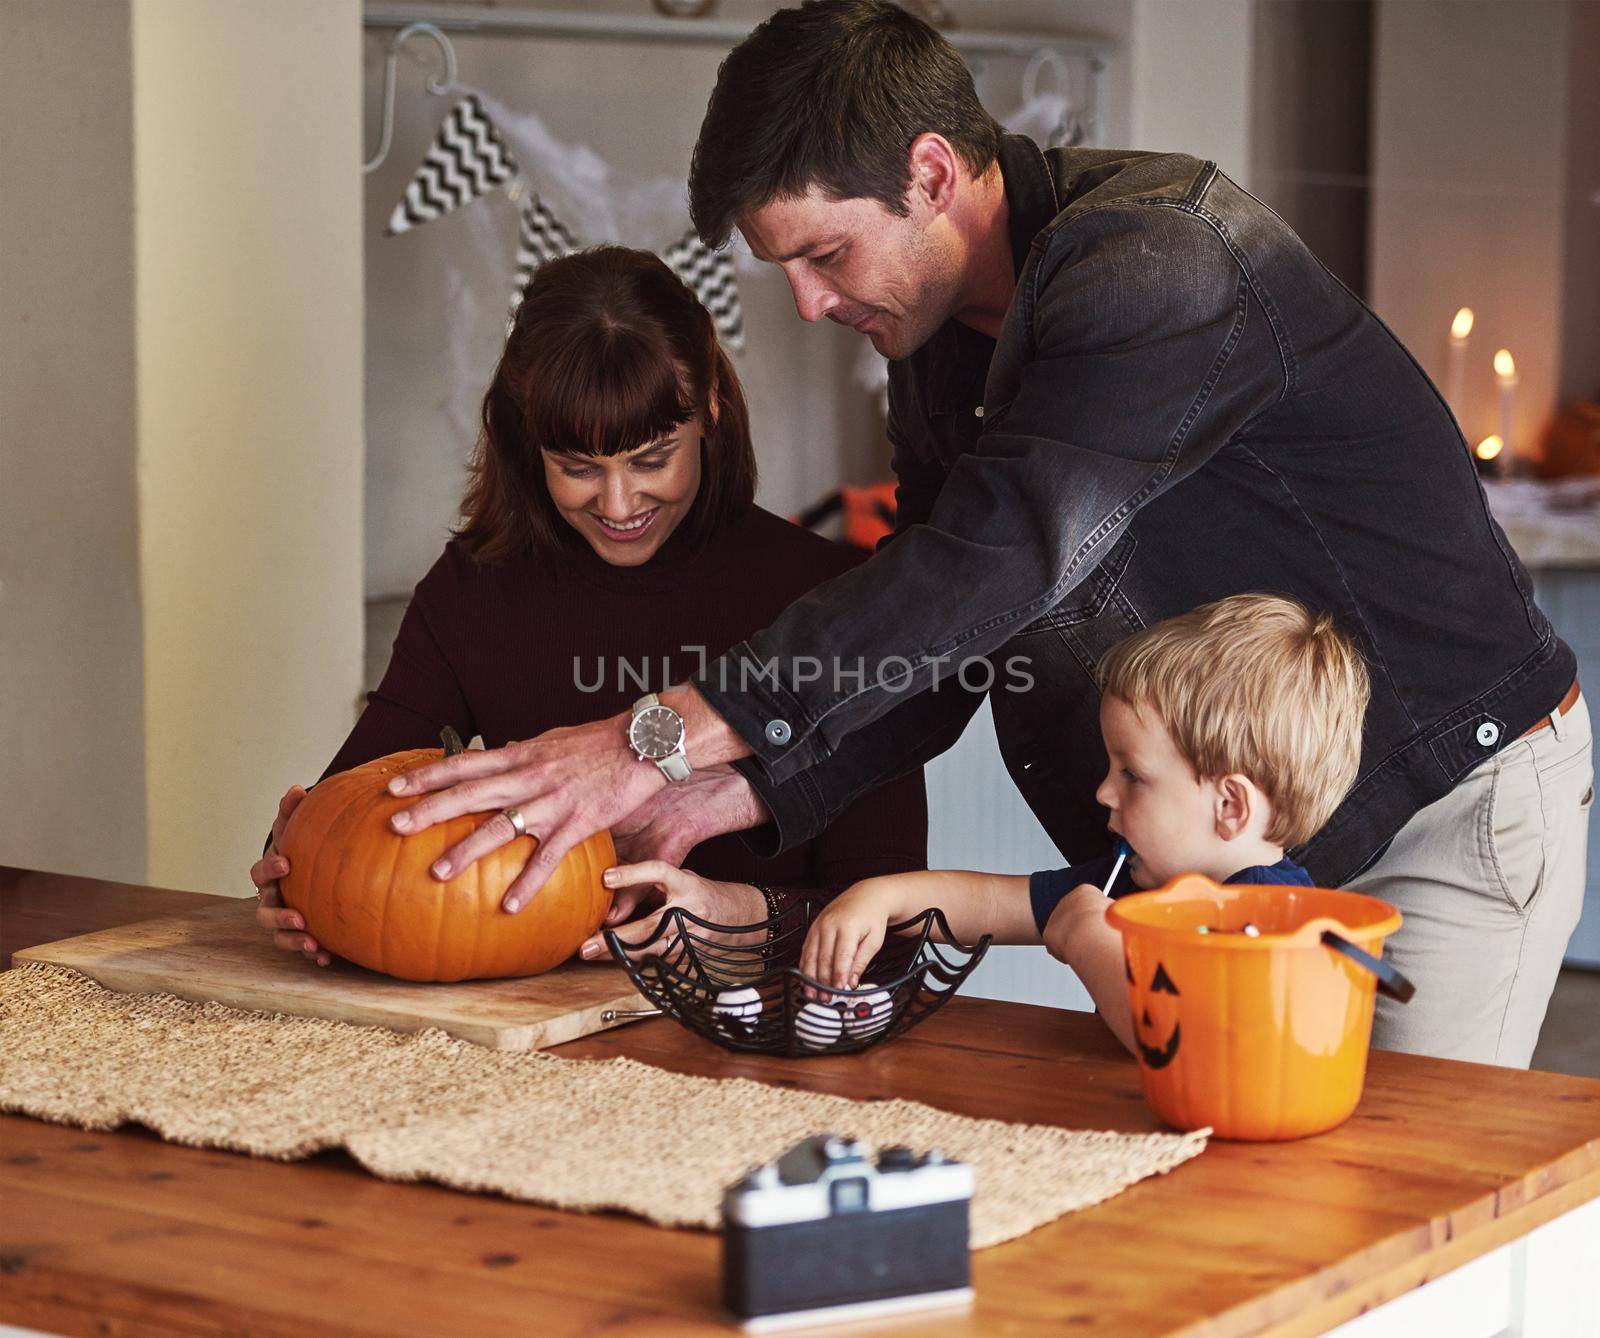 Were getting into the spirit of halloween. an adorable young family carving out pumpkins and celebrating halloween together at home. by YuriArcurs